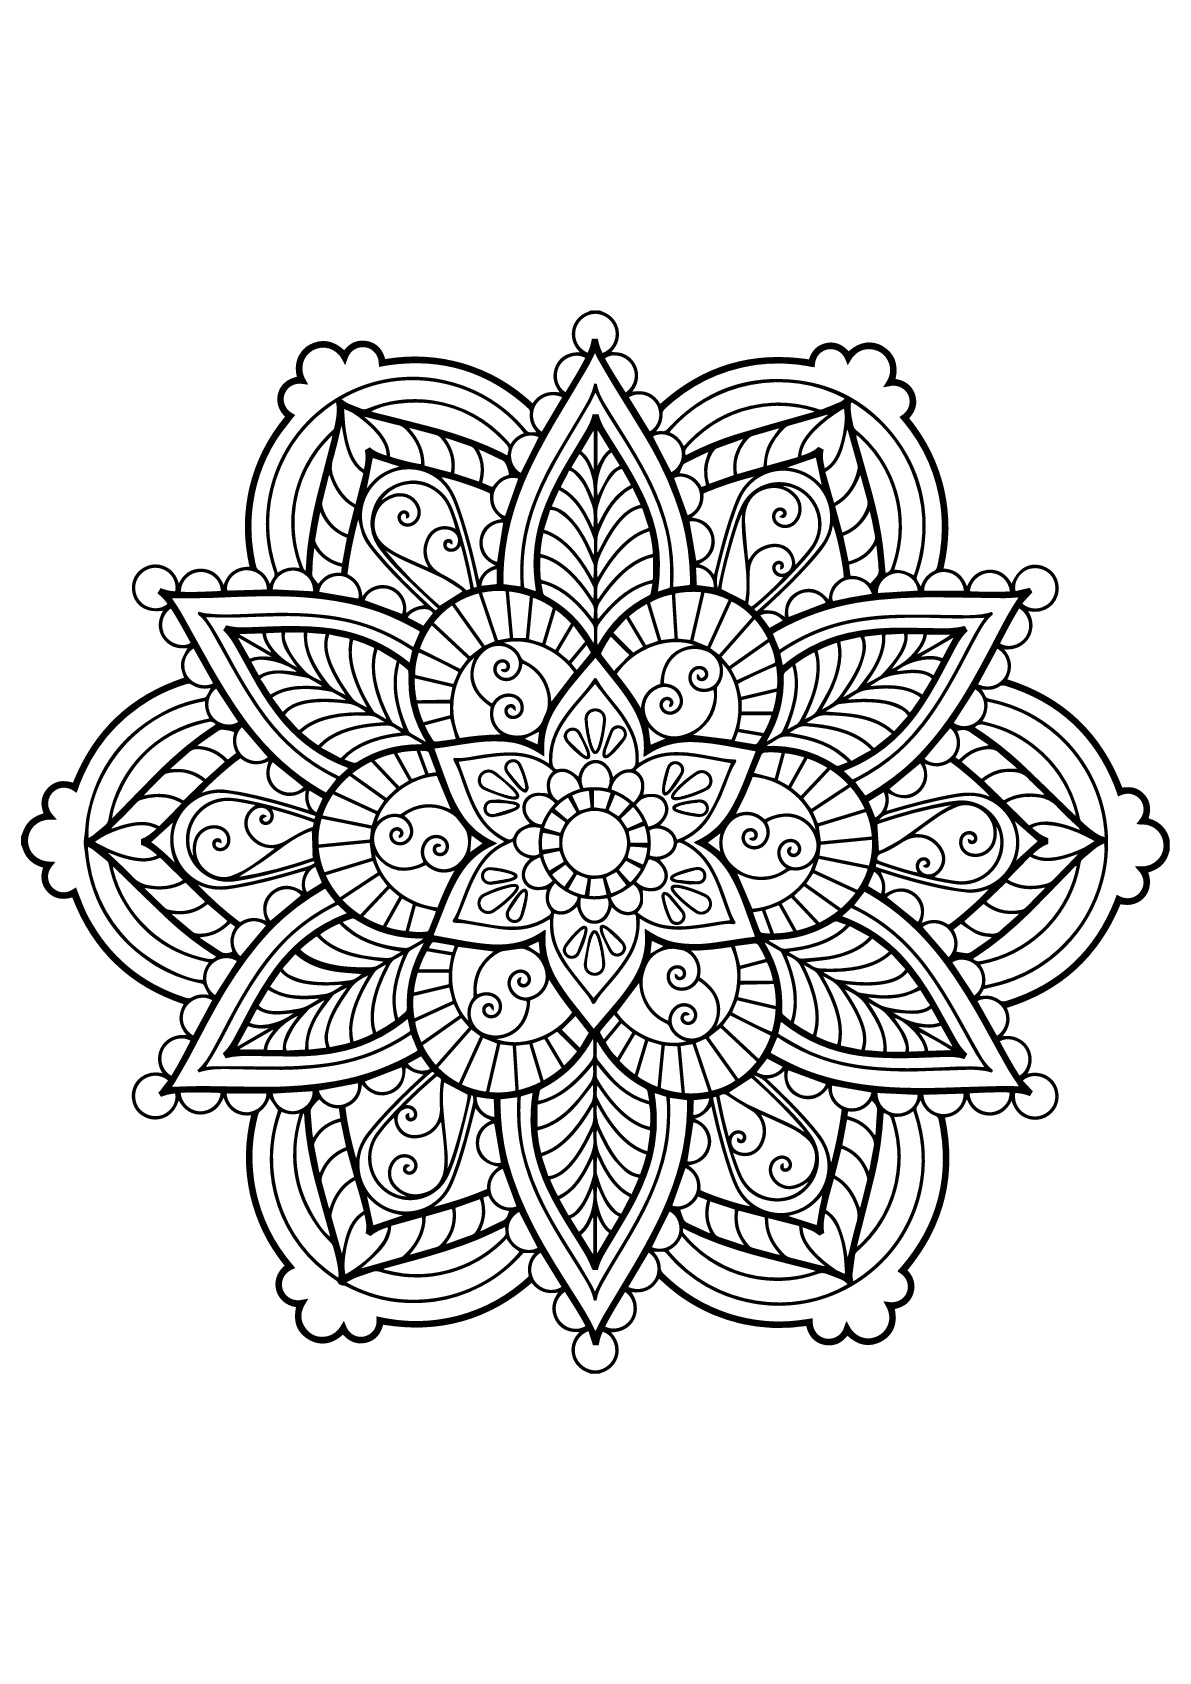 Download Mandala From Free Coloring Books For Adults 28 Mandalas Adult Coloring Pages